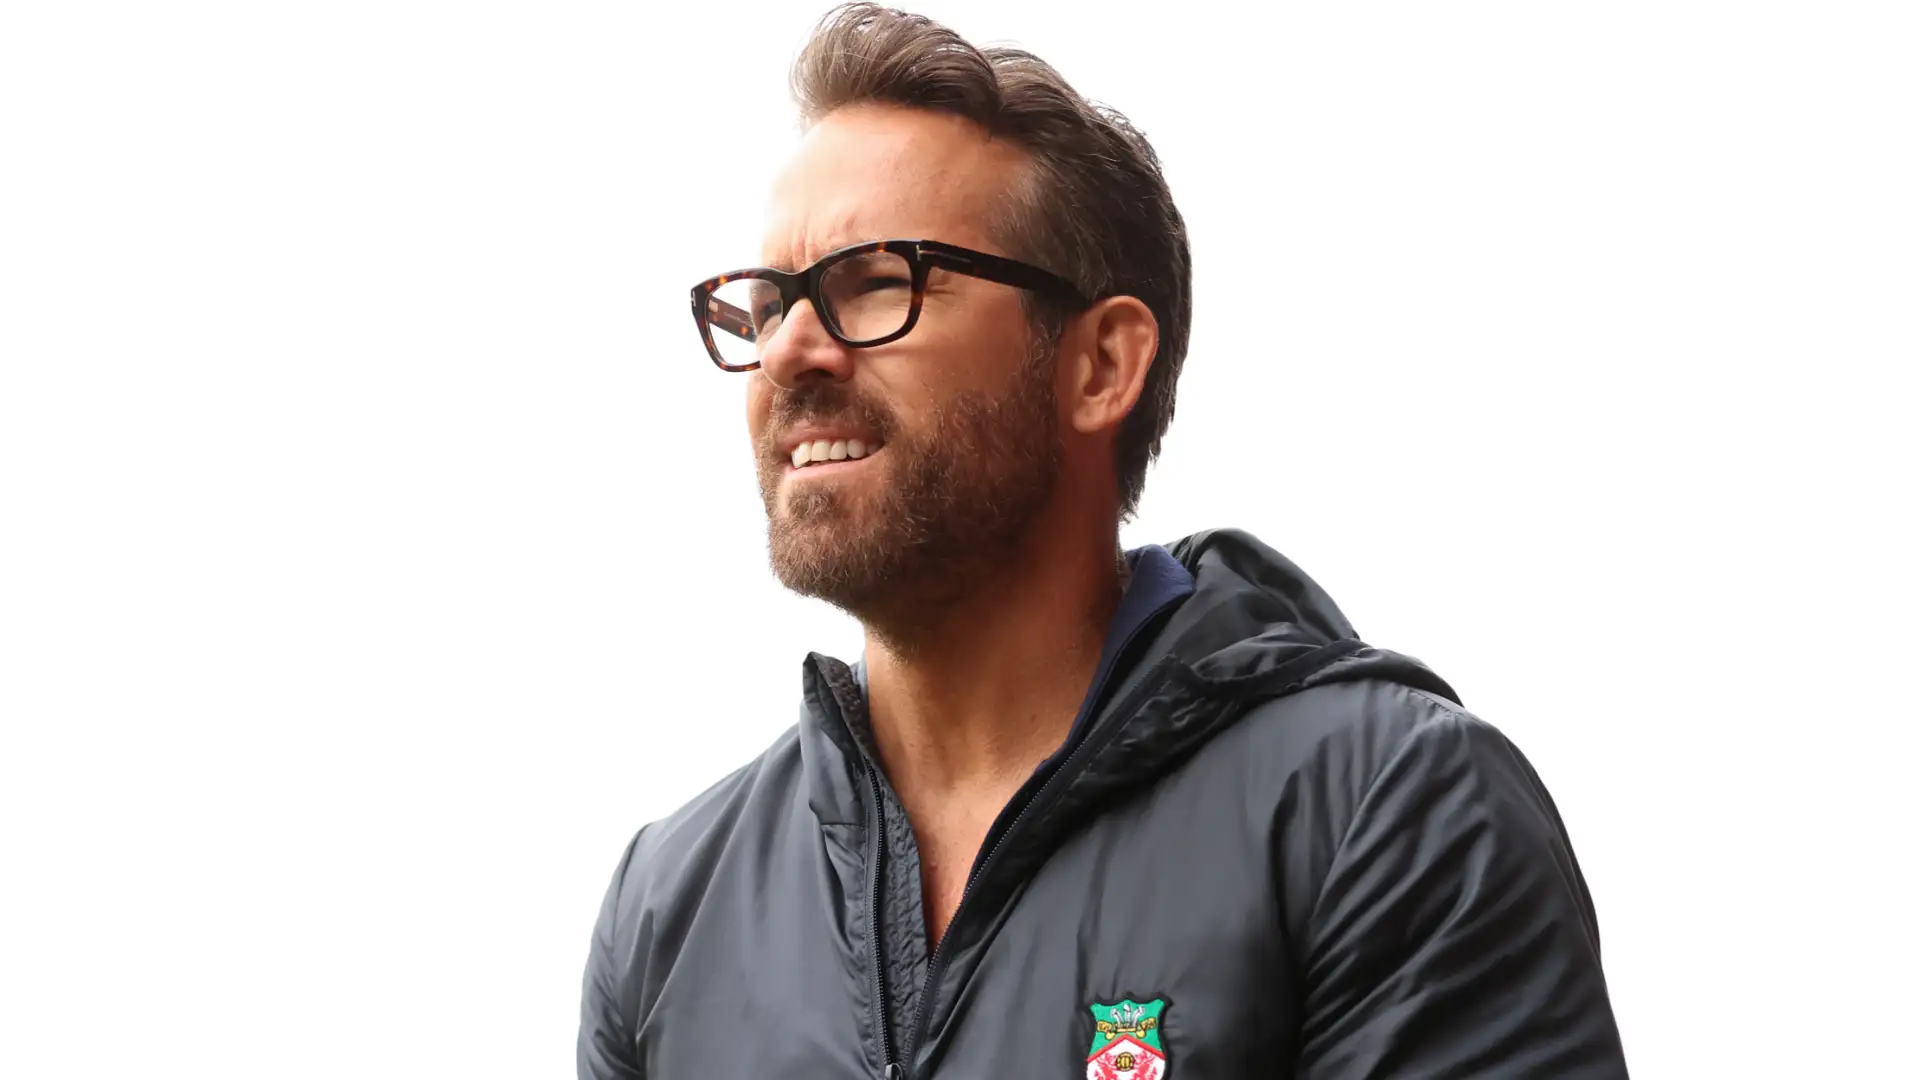 VIDEO: ‘The most inspiring, beautiful thing’ – Ryan Reynolds delighted with how Wrexham have ‘transformed’ Welsh town as Hollywood star takes dig at NFL